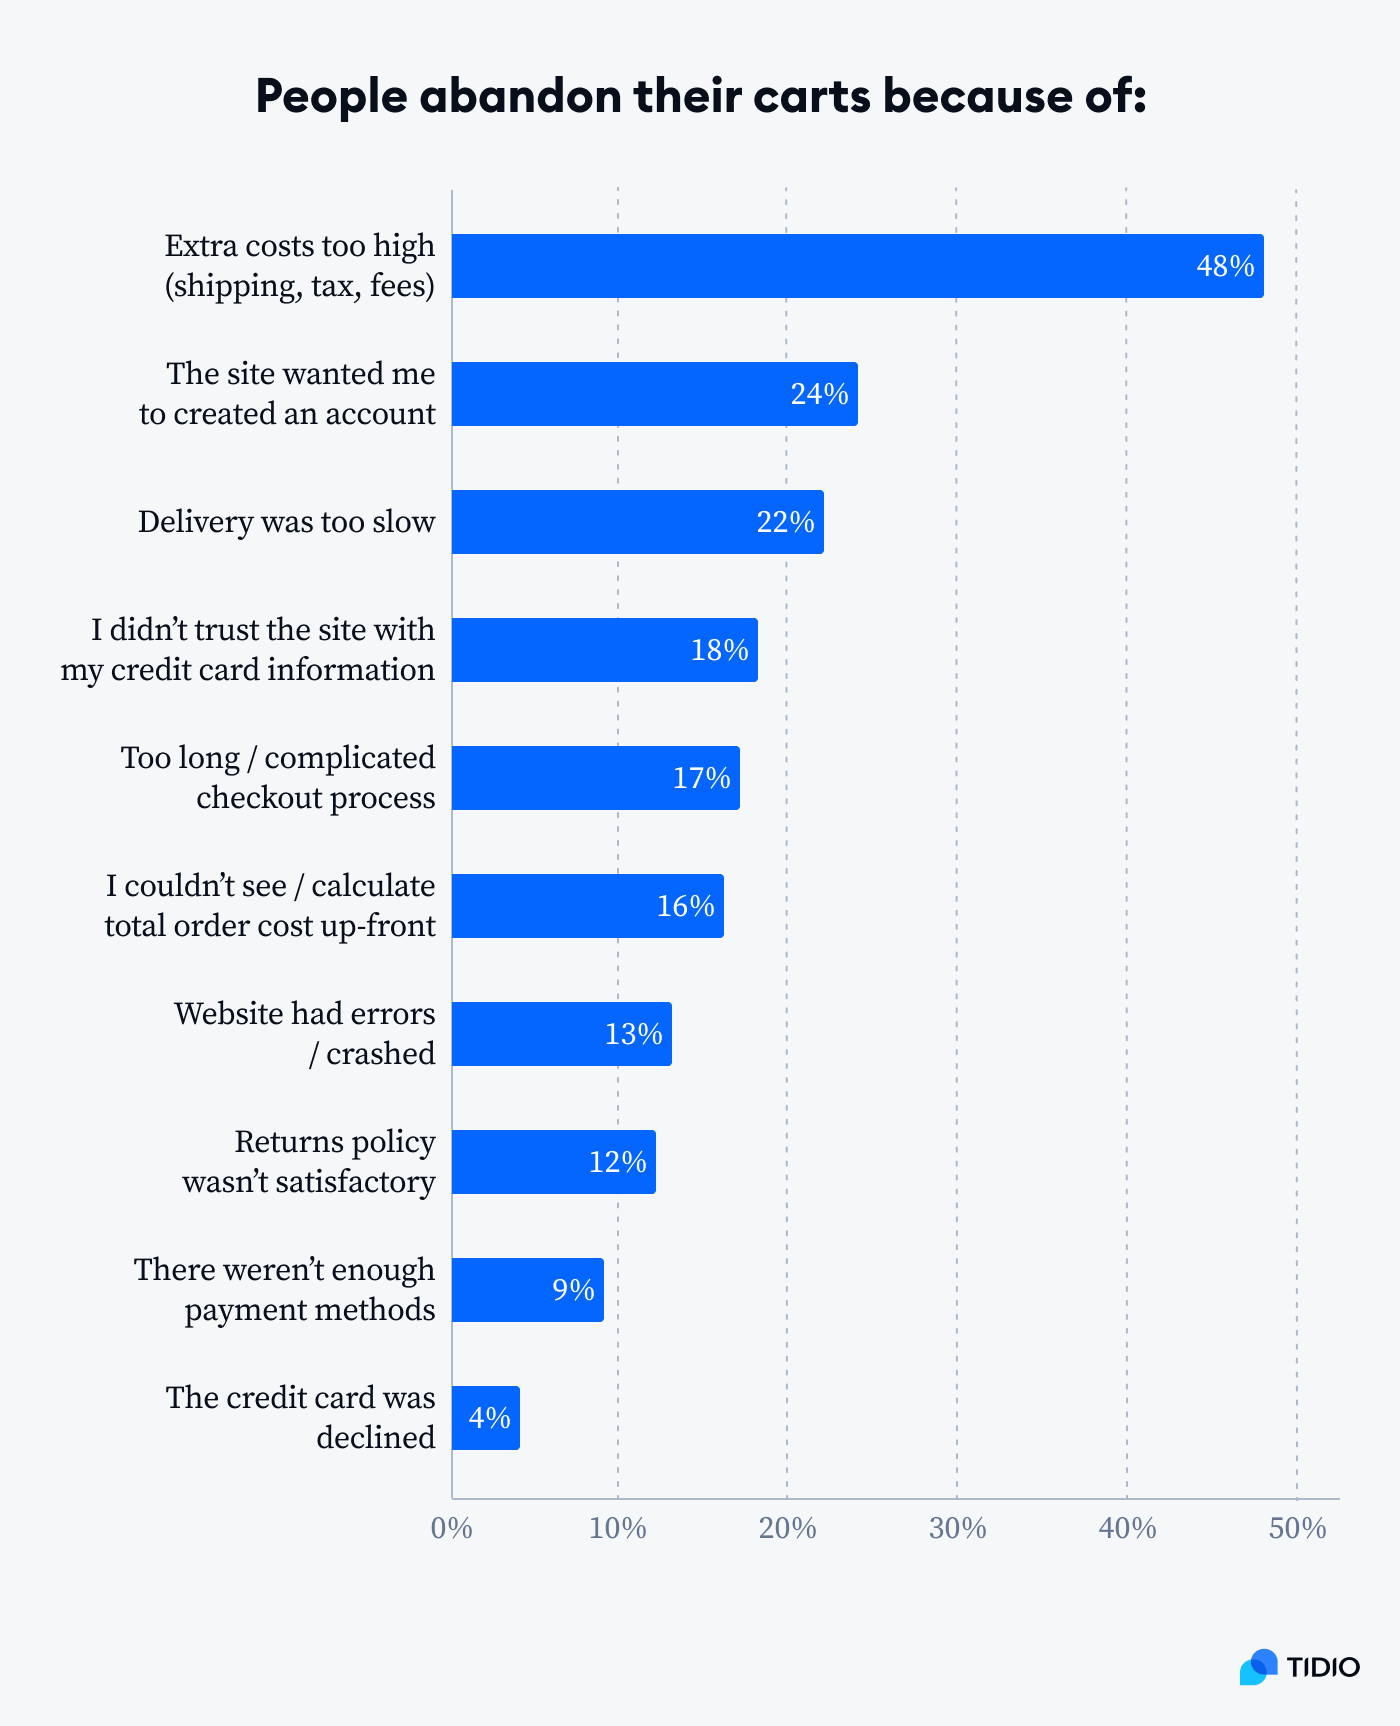 Reasons for cart abandonment on chart